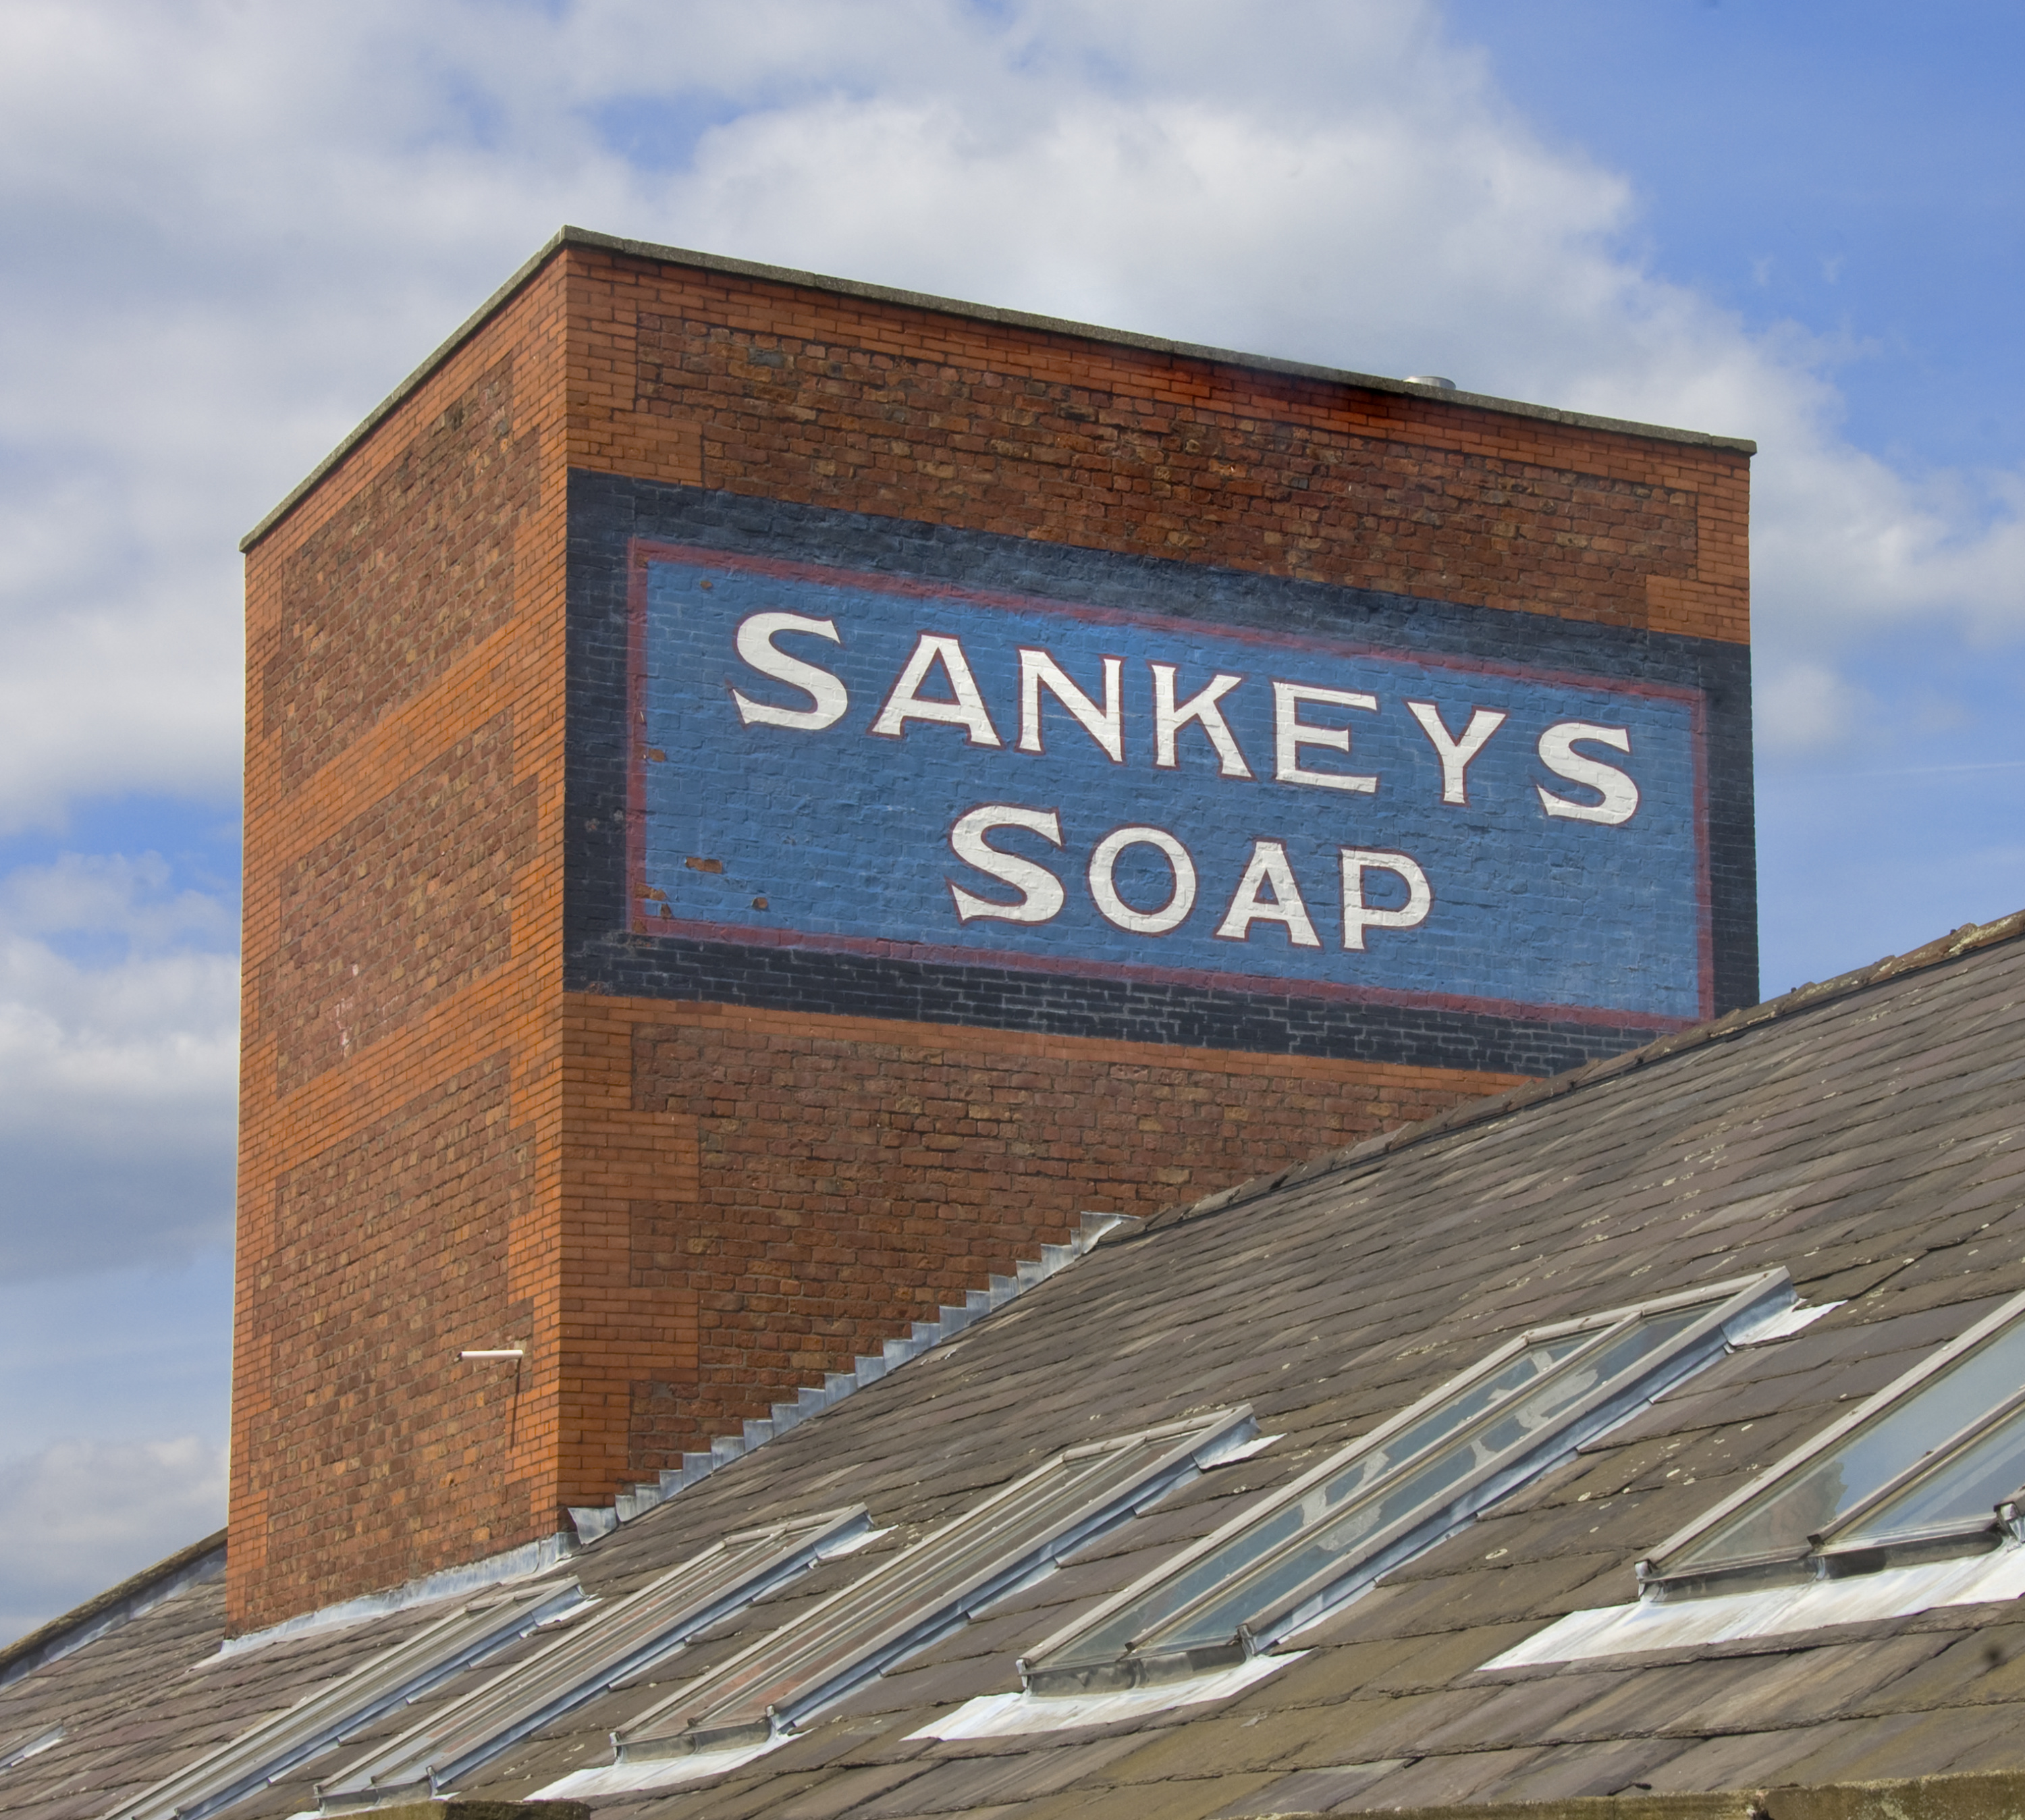 A blue and white sign reading 'Sankey's Soap' on the side of a brick building.